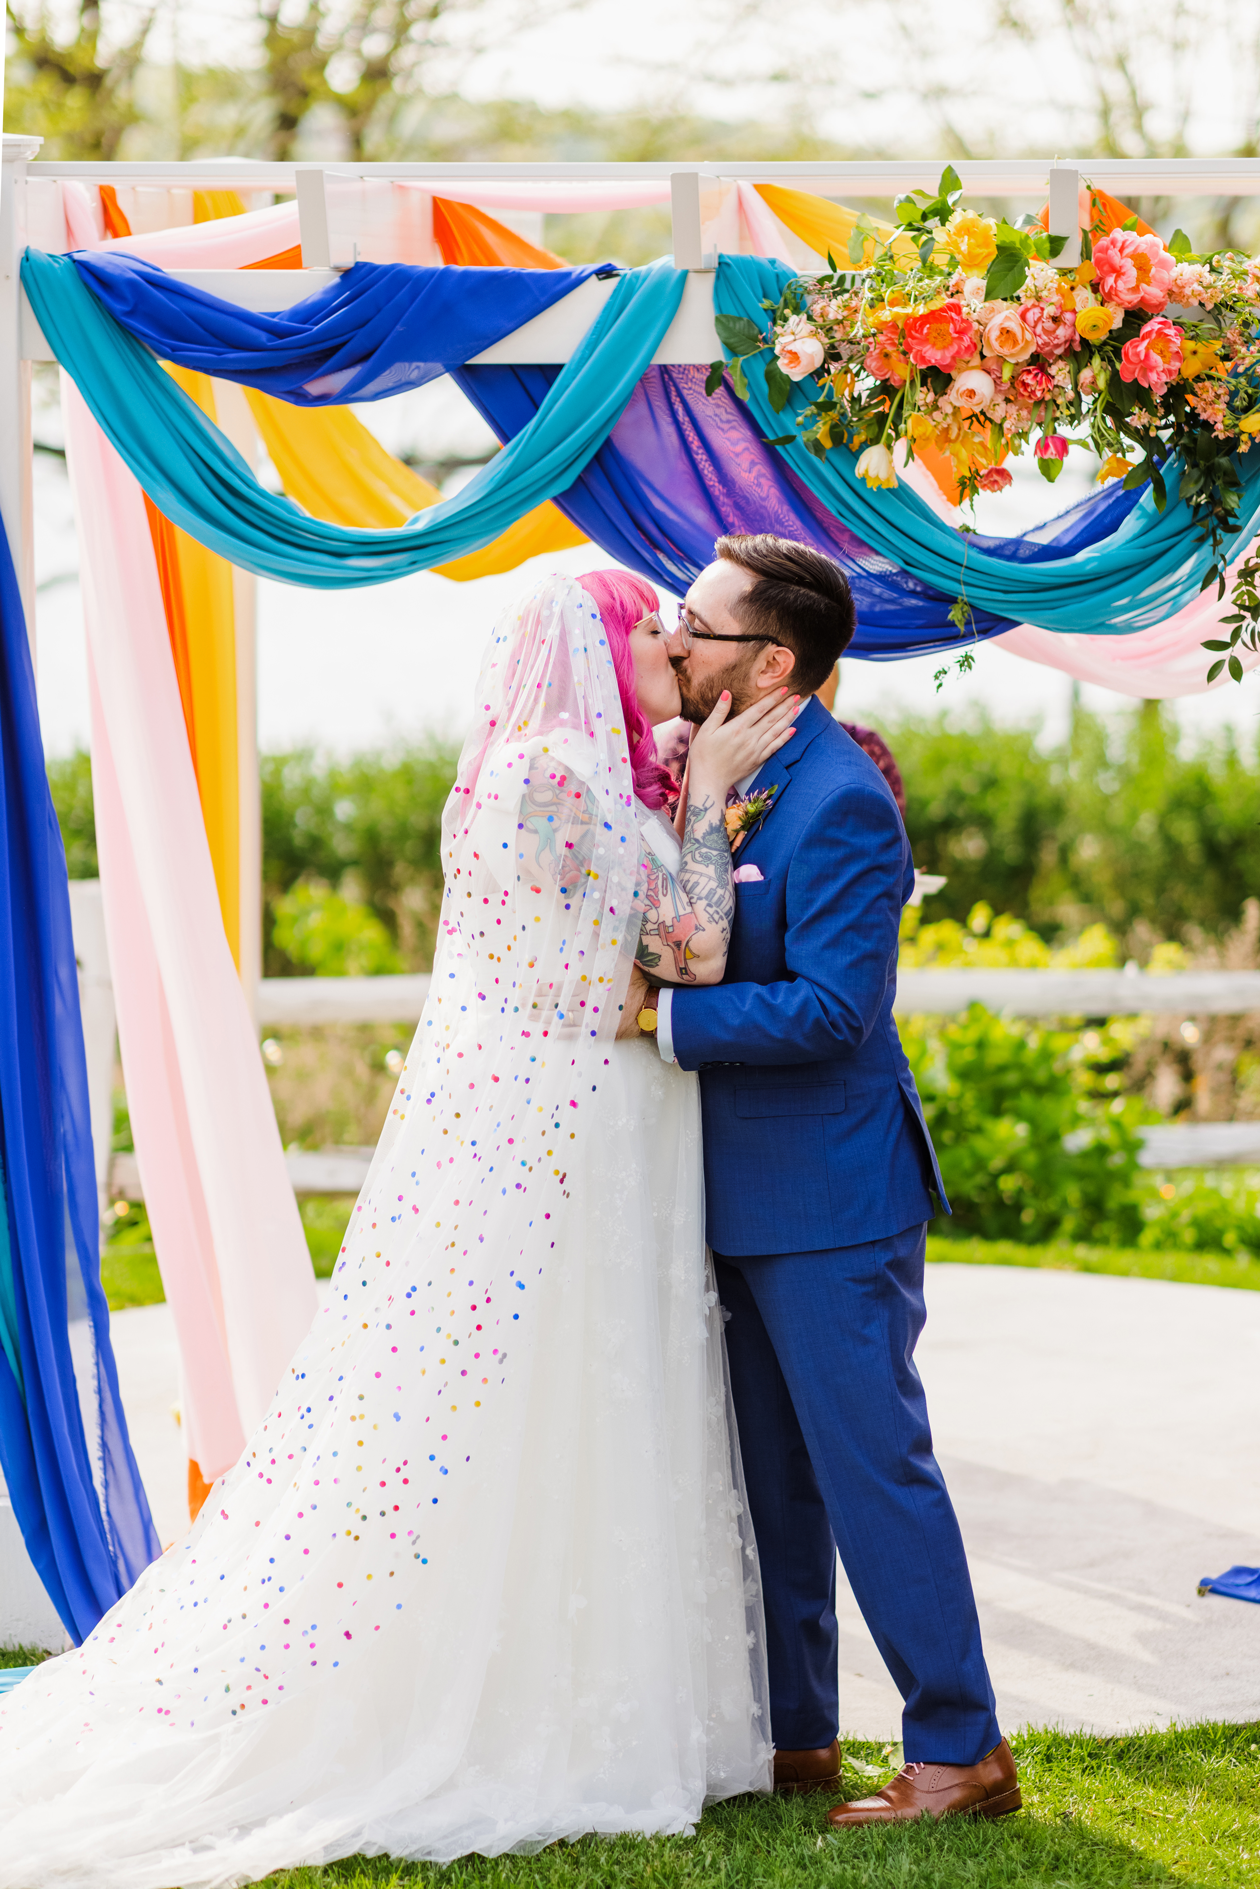 Our Colorful Wedding: Part II